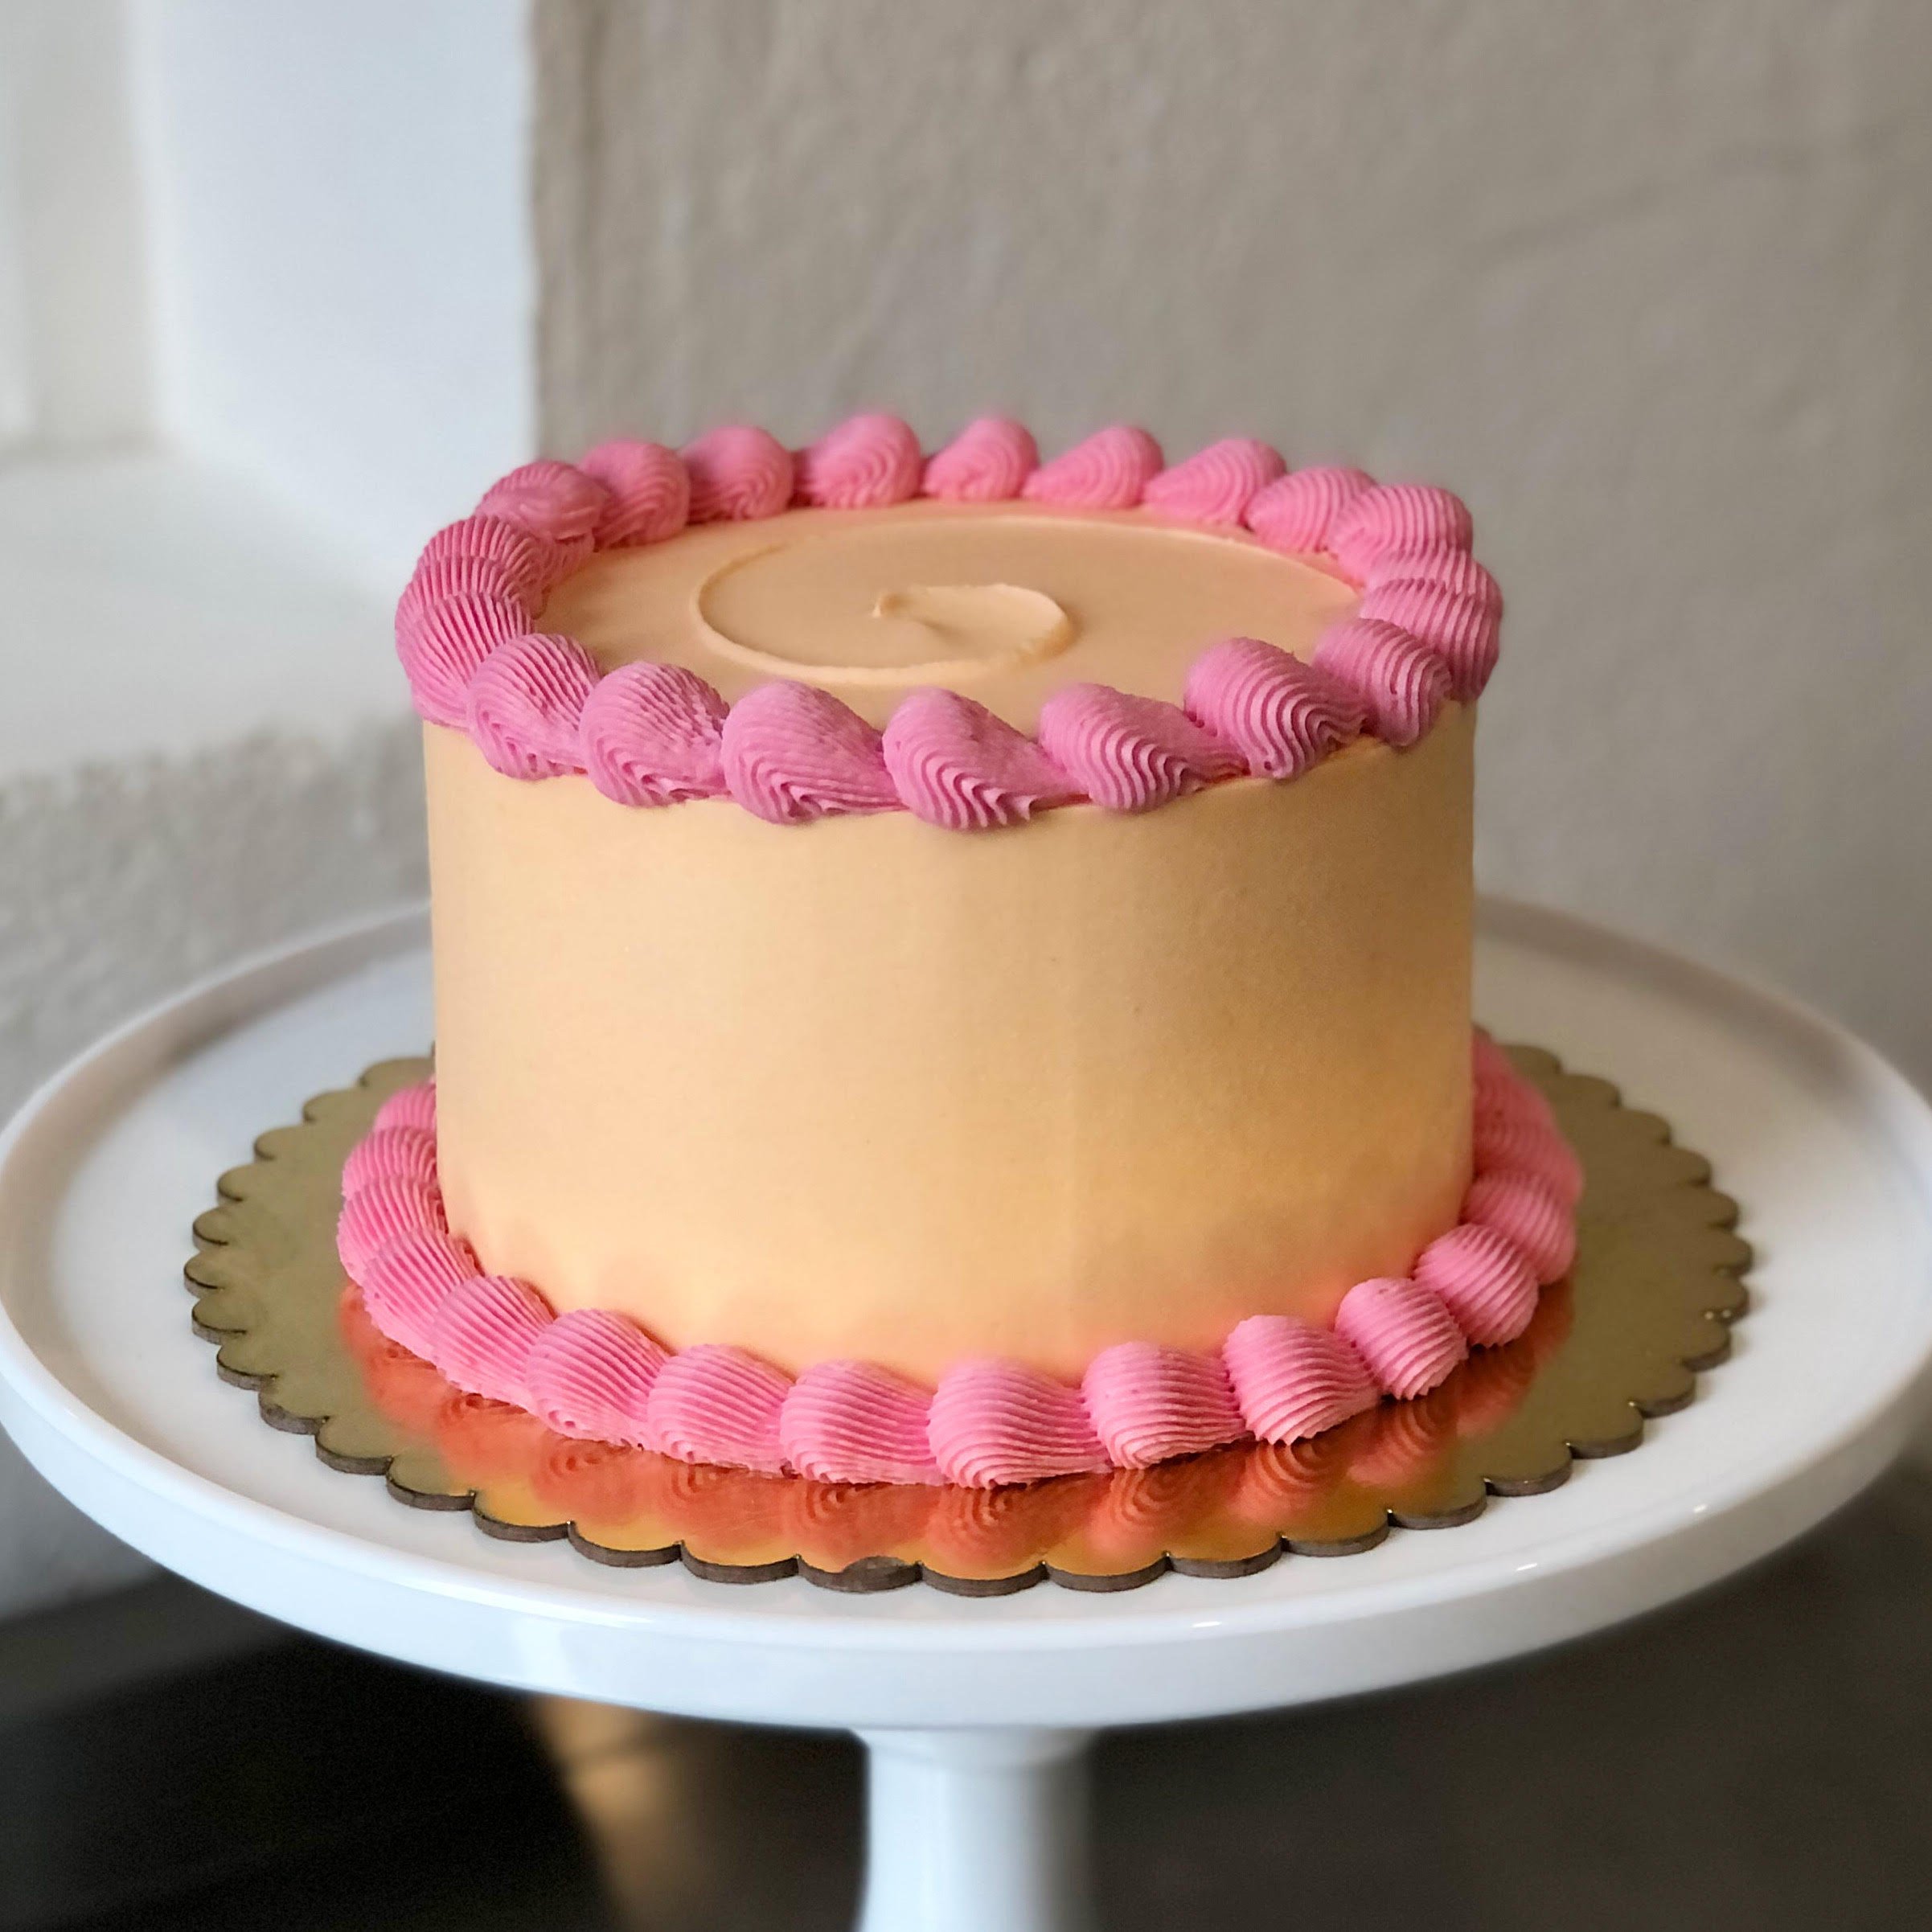 How to Decorate Birthday Cake with Butter Cream